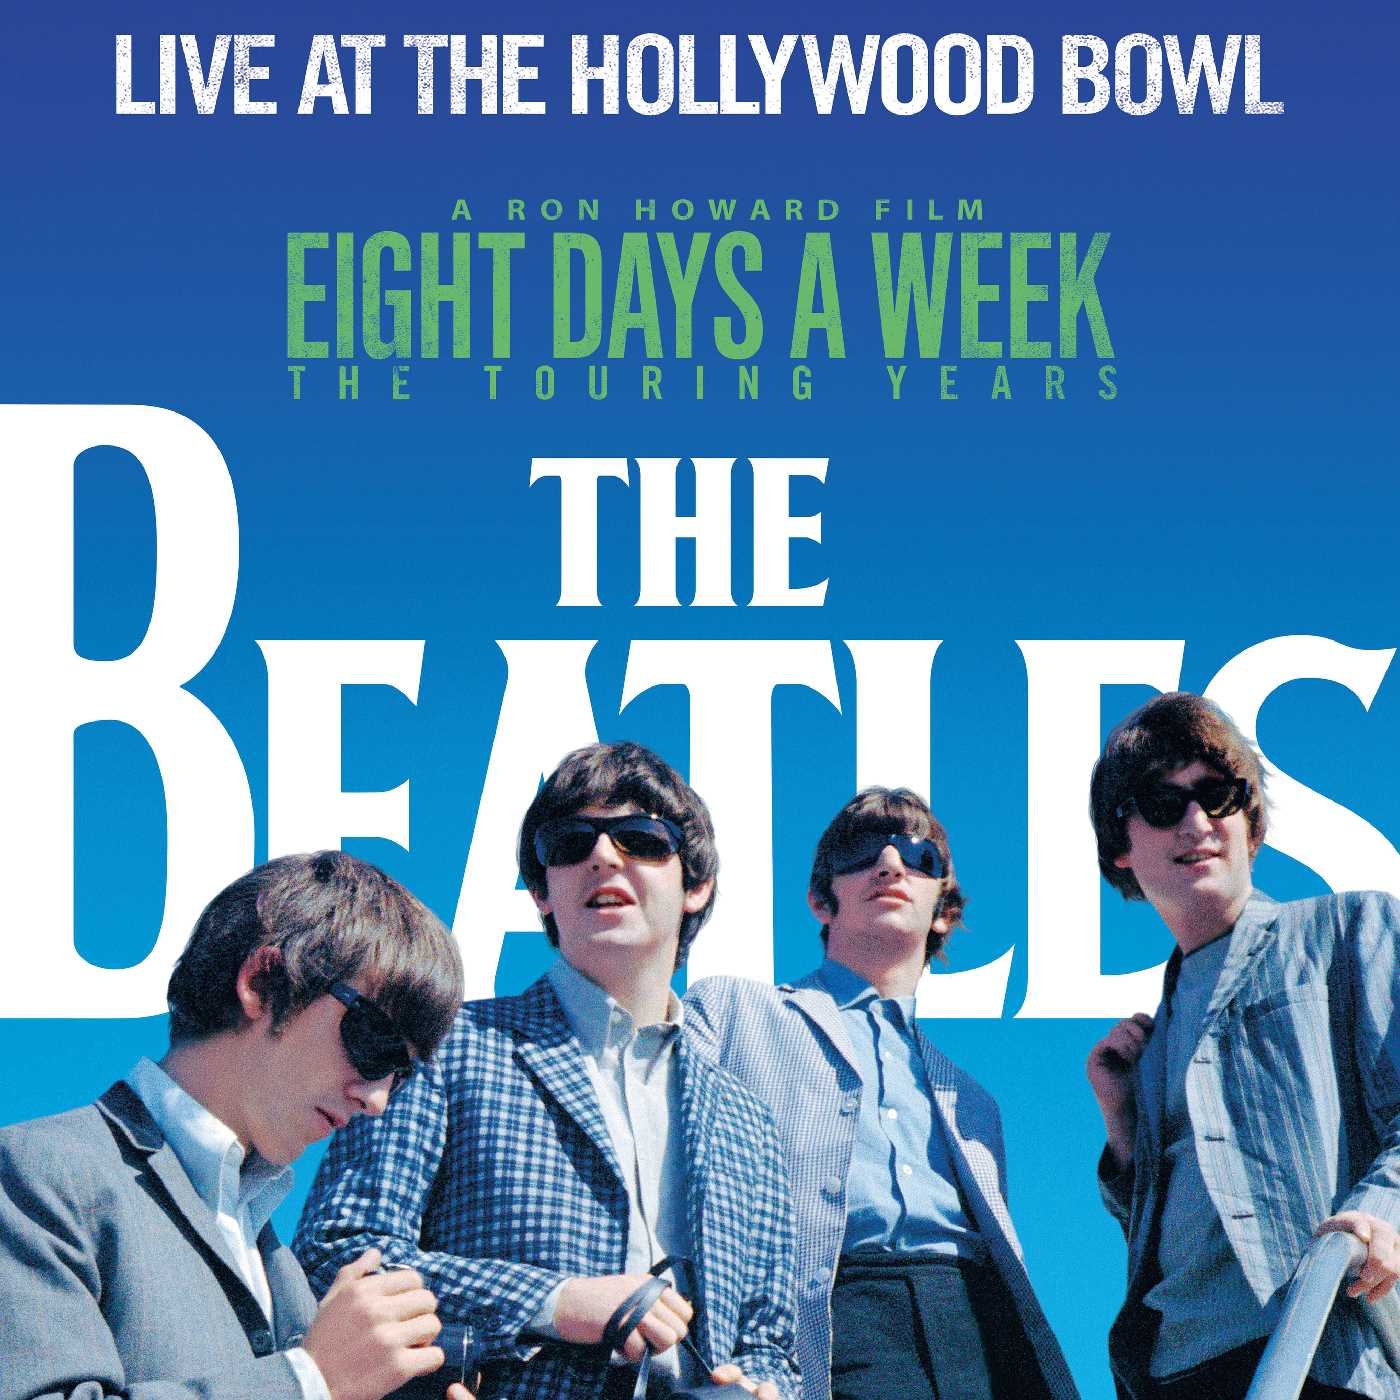 The Beatles — Live at the Hollywood Bowl